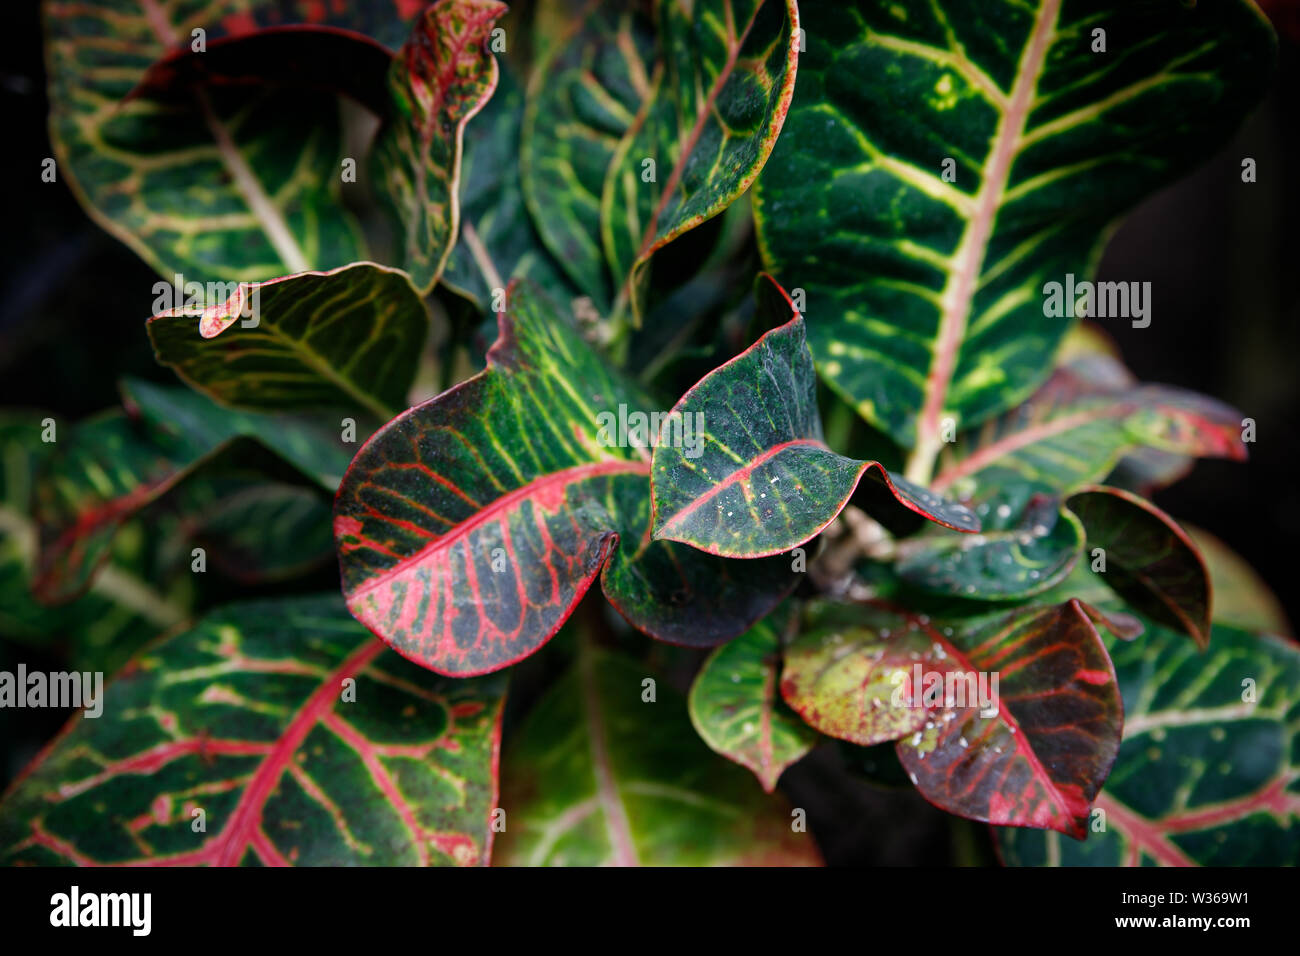 Leaves Of The Croton Plant Imagenes De Stock Leaves Of The